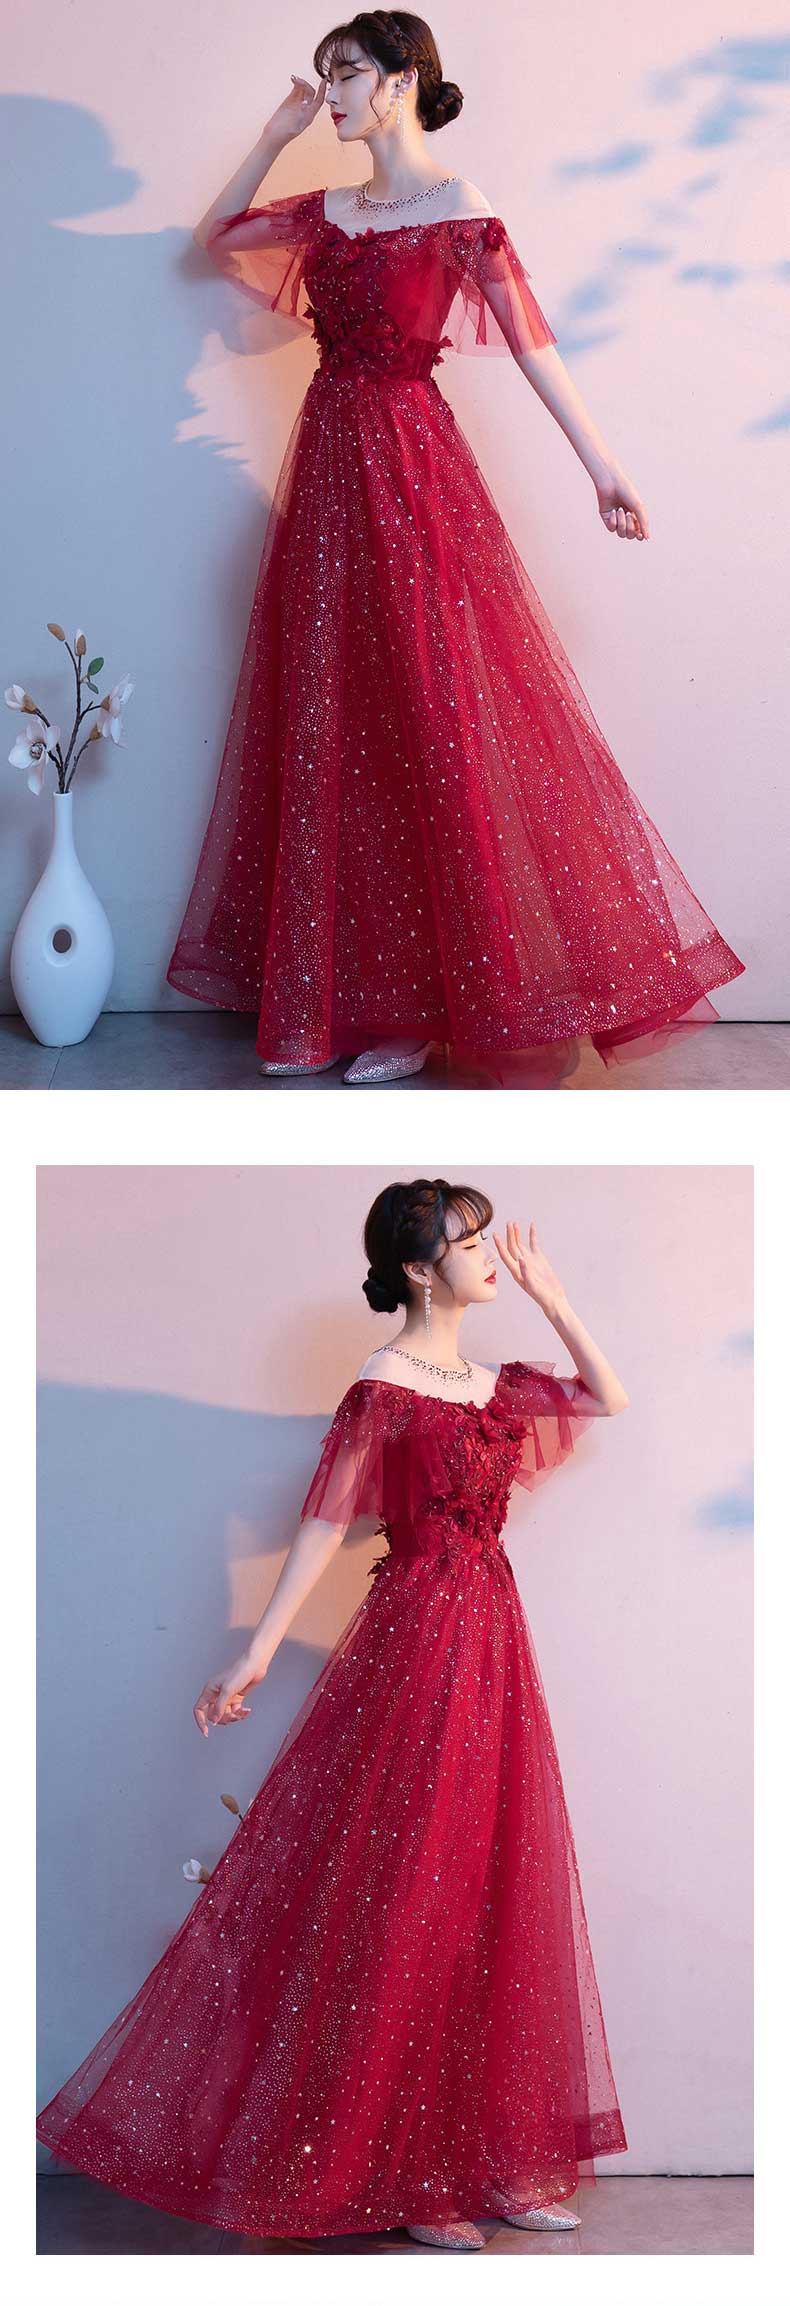 Sweet-Off-Shoulder-Chiffon-Wine-Red-Cocktail-Prom-Long-Dress11